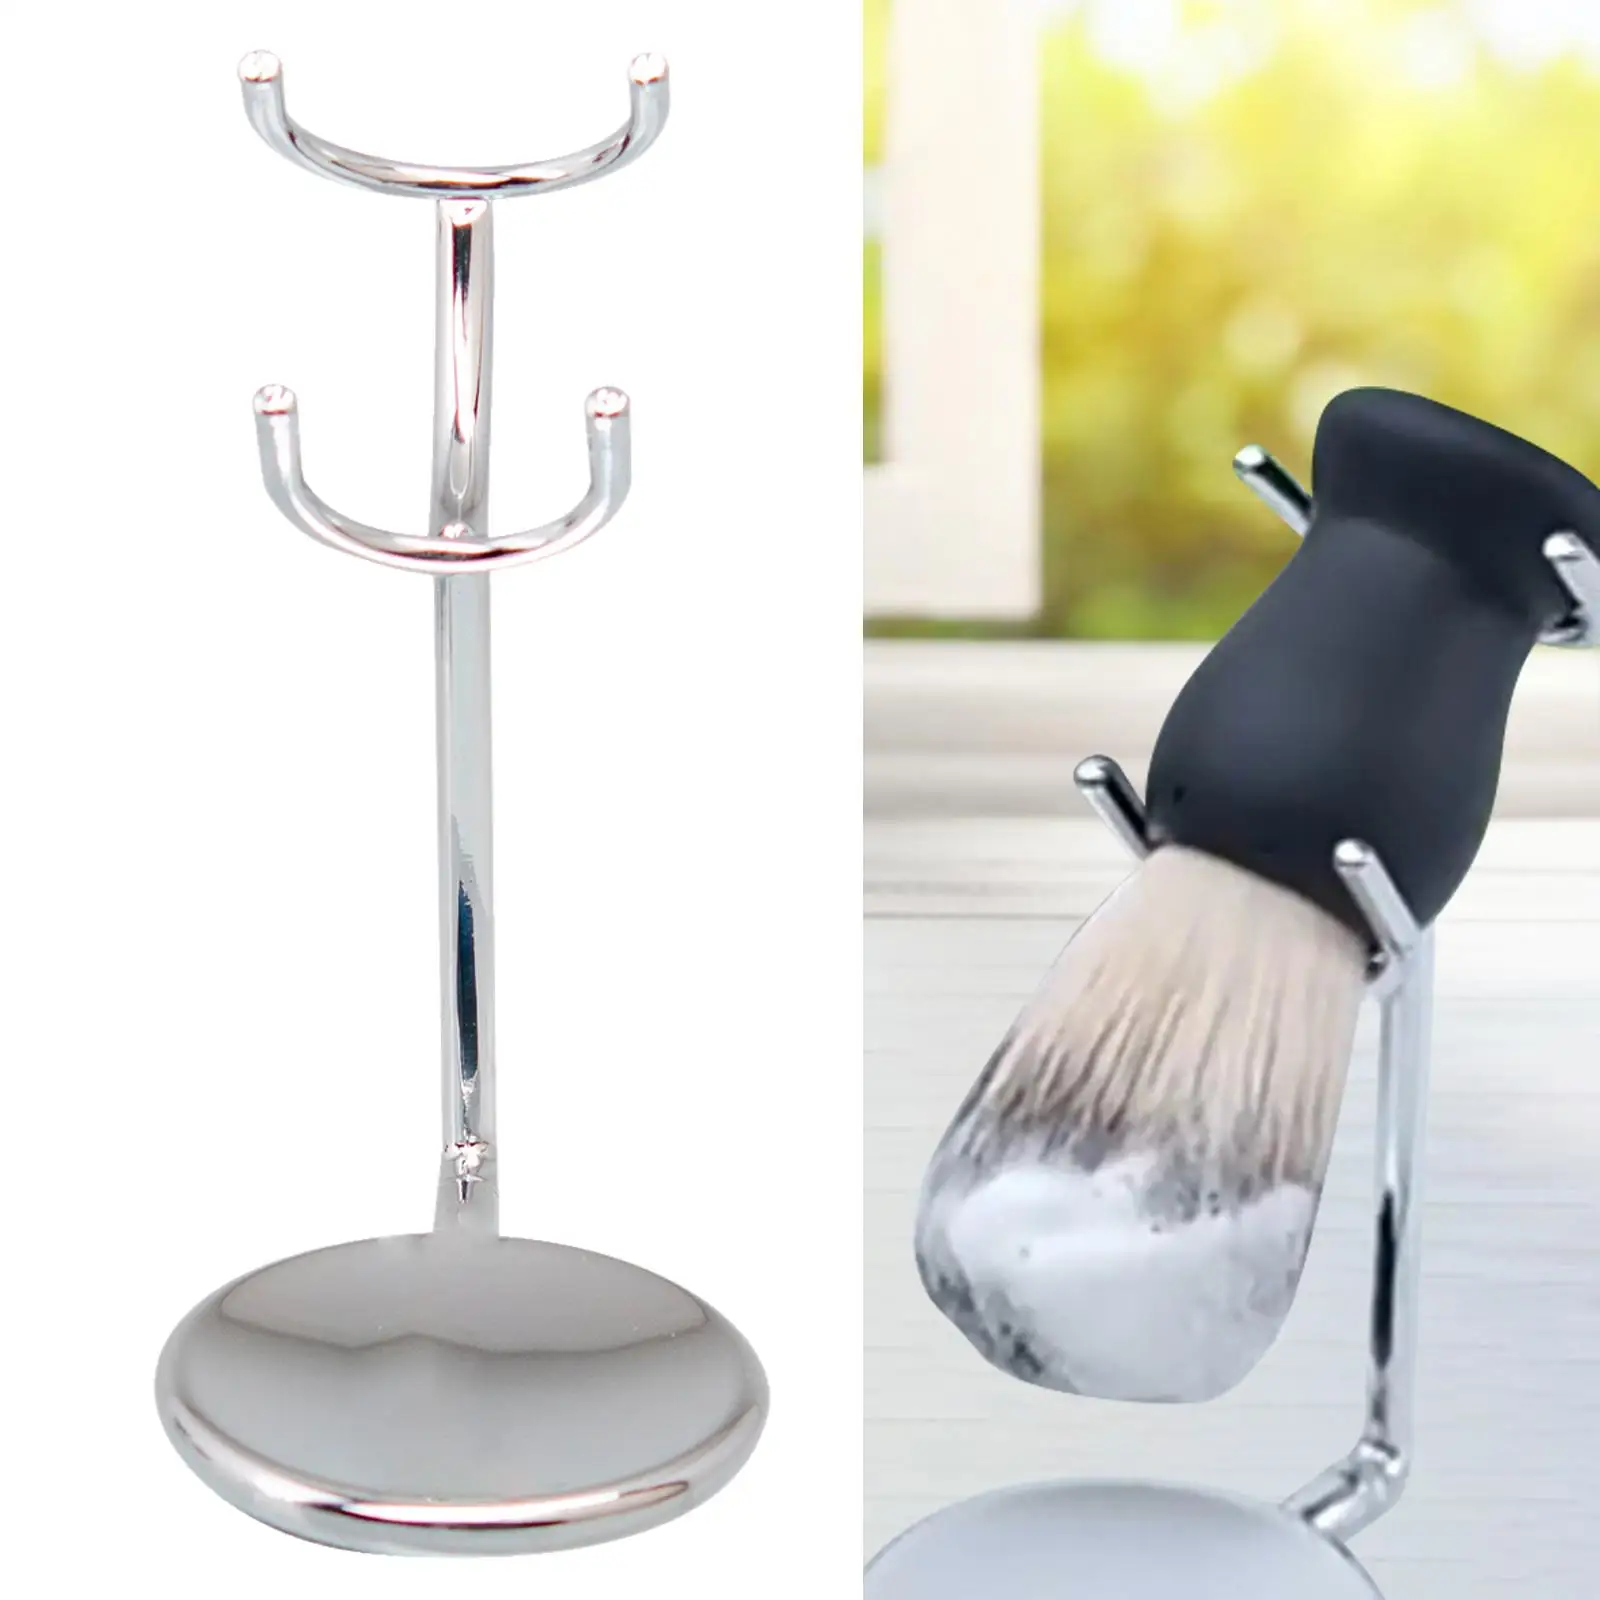 Shaver Desktop Holder Stand Gifts Bathroom Accessories Free Standing Storage Organization Extra Stability Weighted Base Alloy